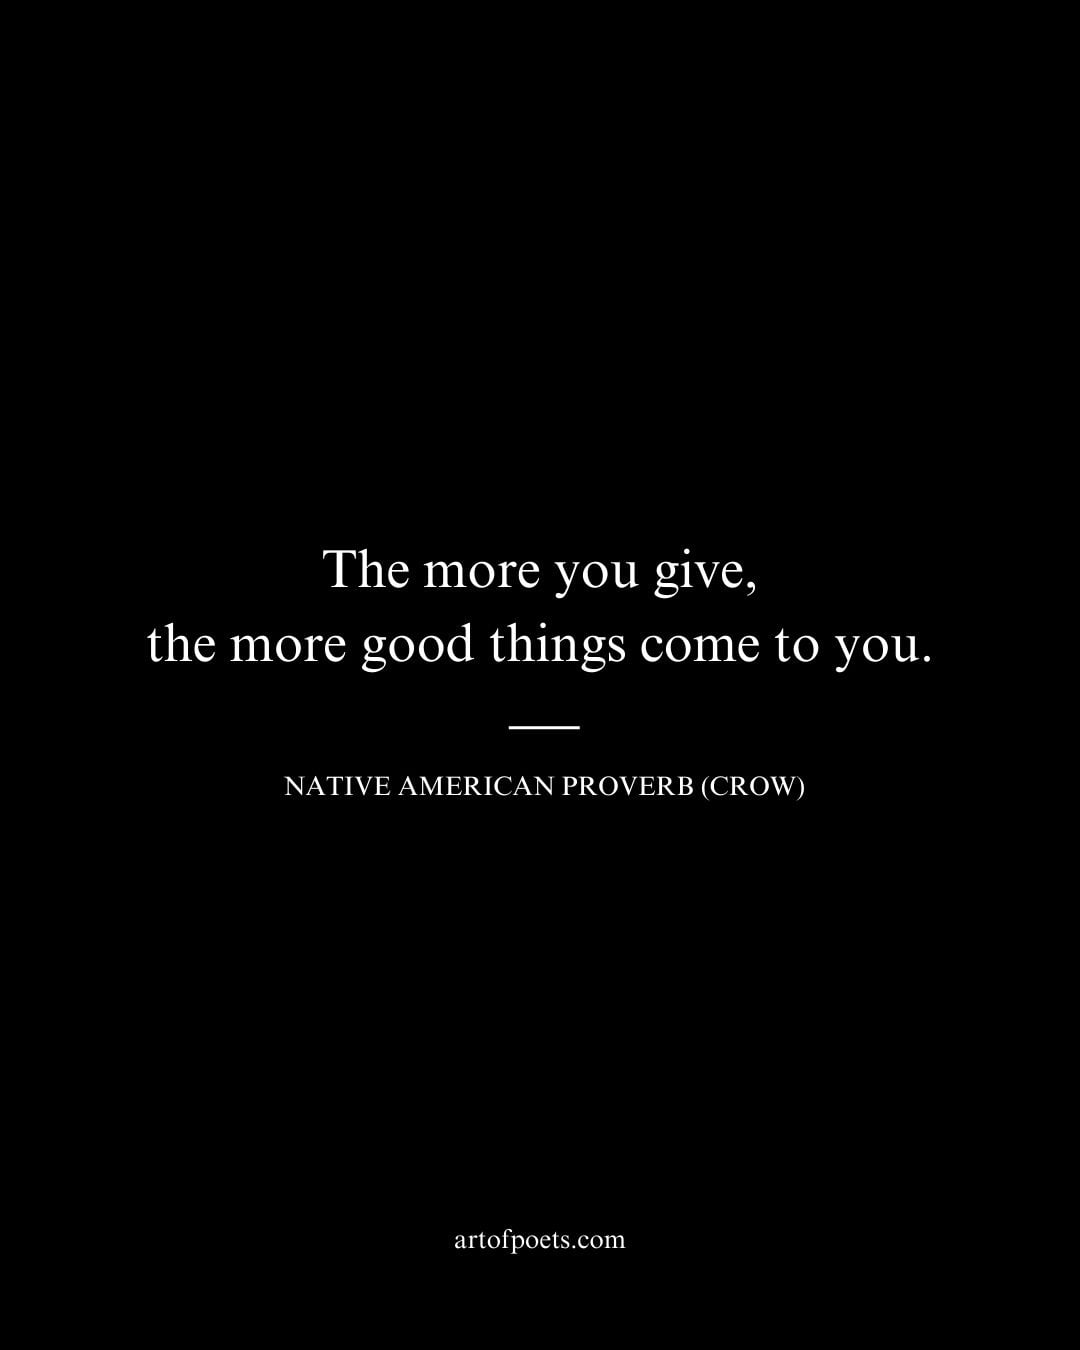 The more you give the more good things come to you